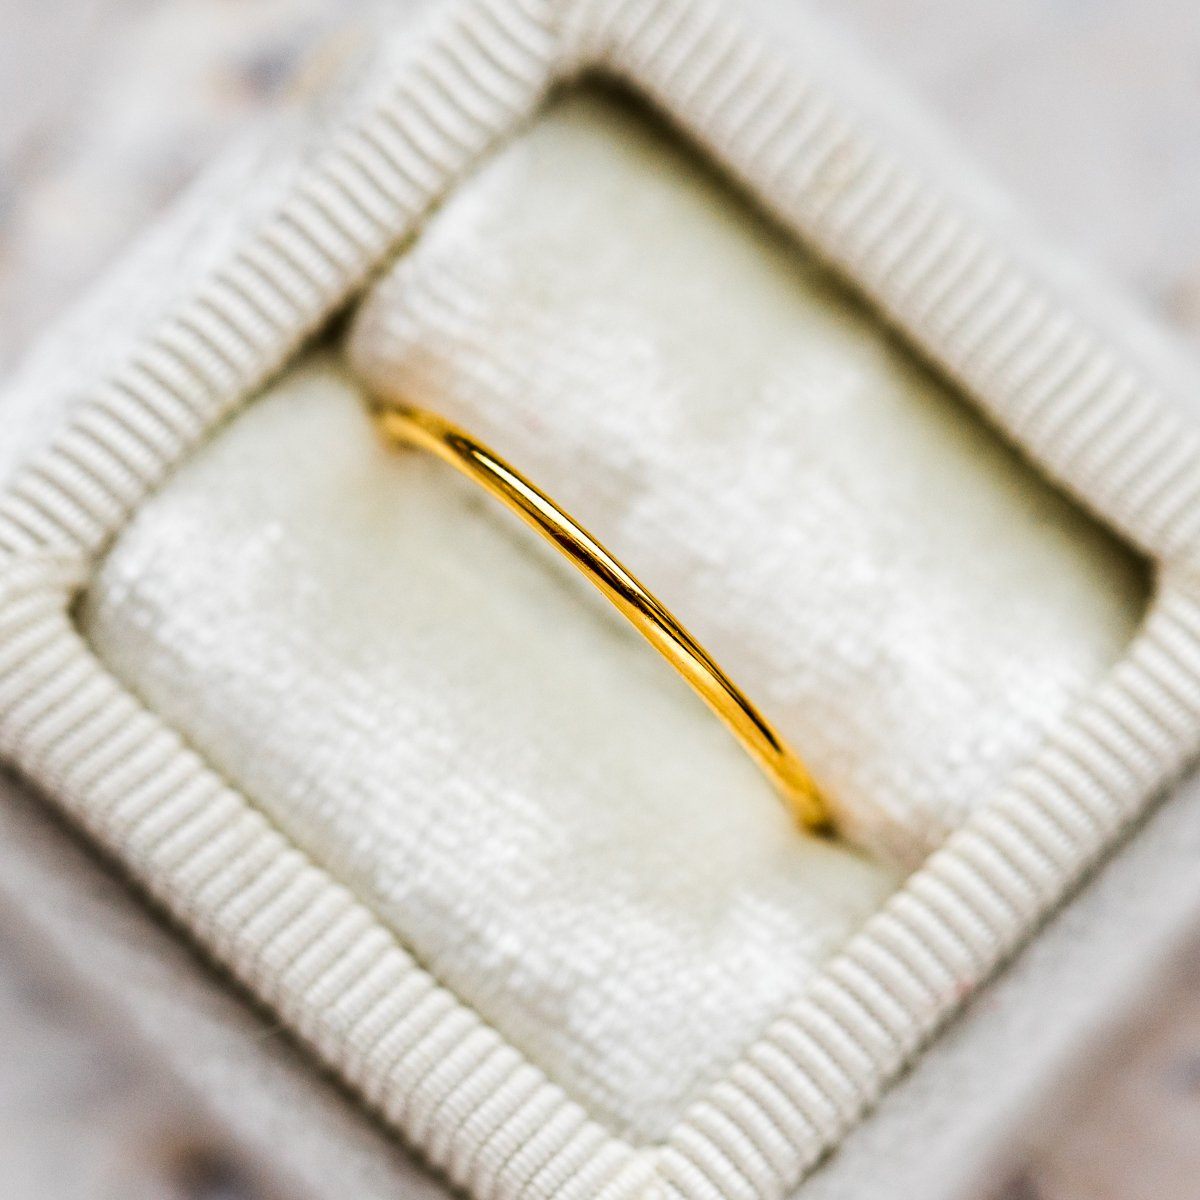 Twiggys Simple Gold Band - rings - Lust & Luster local eclectic